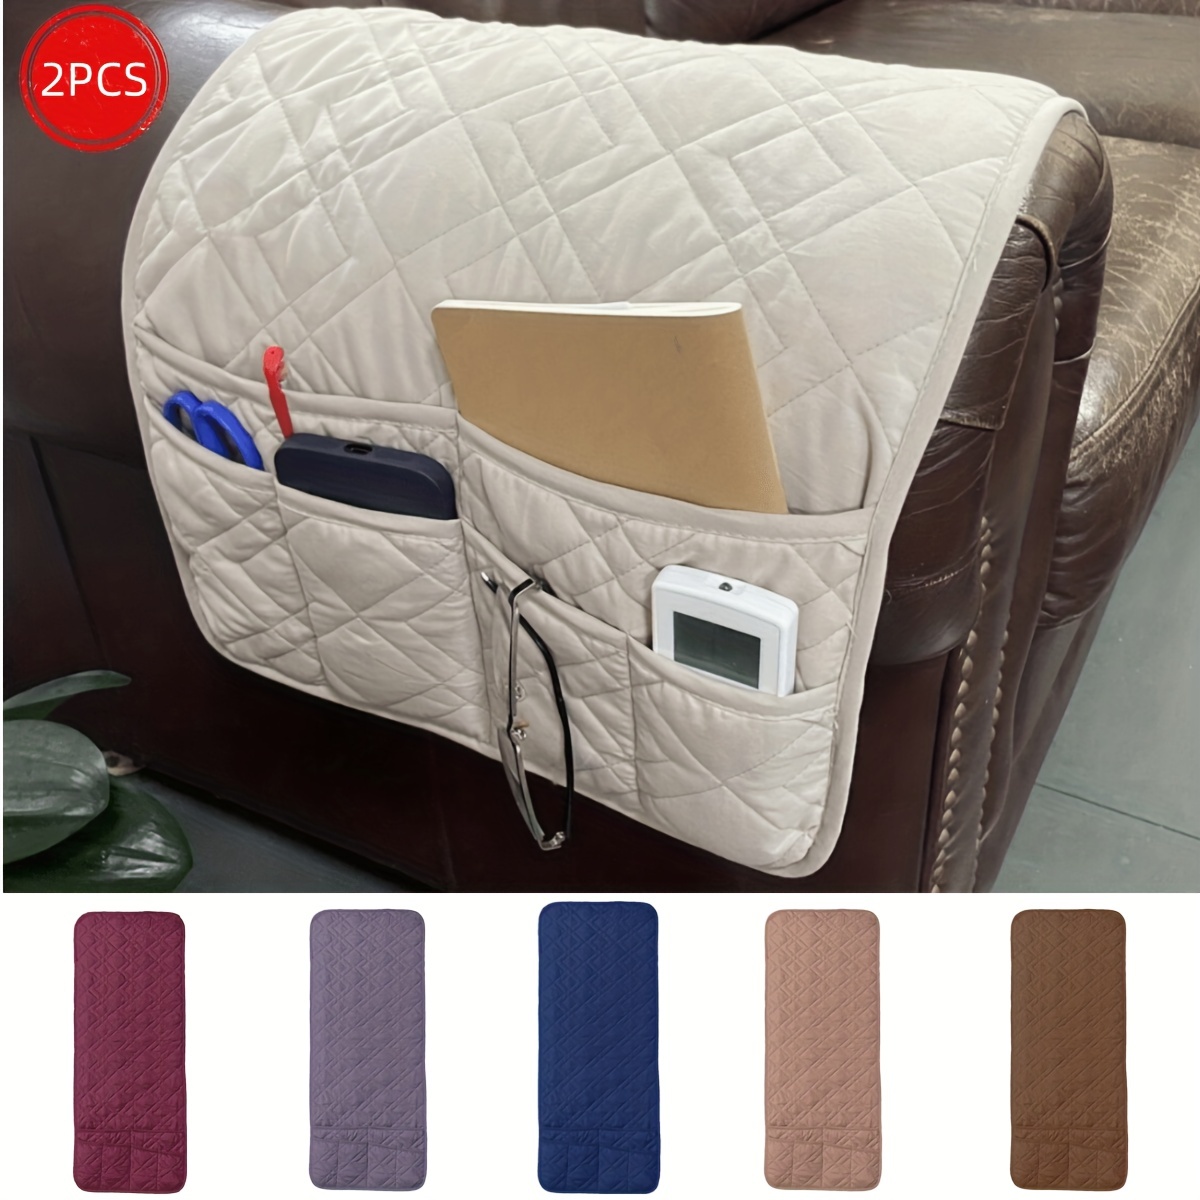 2pcs waterproof non slip sofa armrest cover checkered pattern sofa slipcover with 6 storage pocket sofa armrest cushion sofa cover filing polyster for living room home decor chair bedside all season universal slipcover